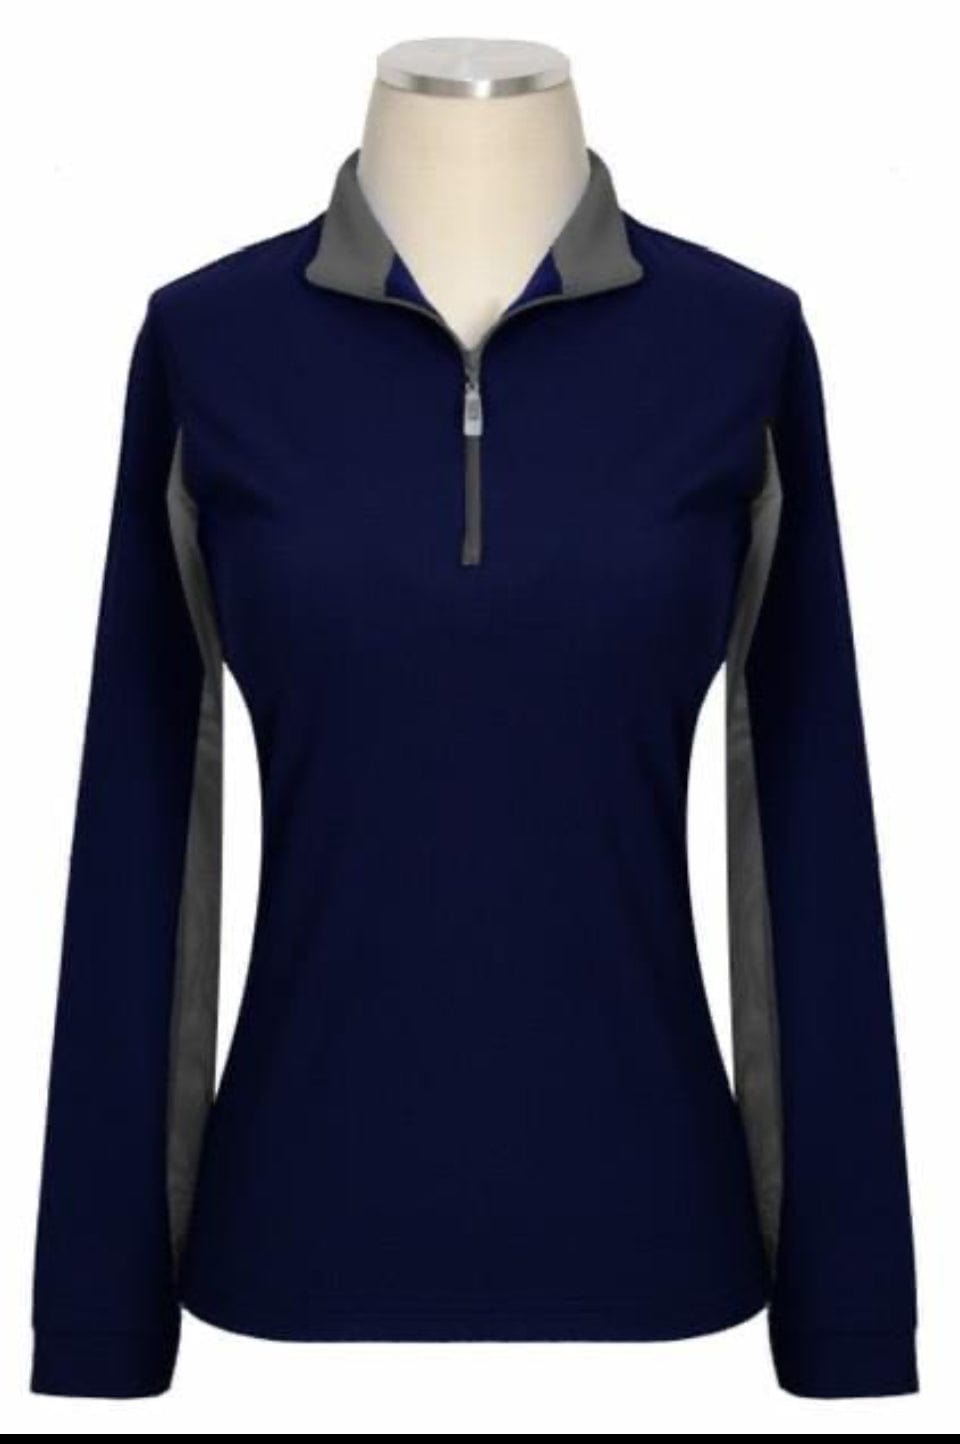 EIS Youth Shirt Navy/Grey EIS- Sun Shirts Youth Medium 6-8 equestrian team apparel online tack store mobile tack store custom farm apparel custom show stable clothing equestrian lifestyle horse show clothing riding clothes ETA Kids Equestrian Fashion | EIS Sun Shirts horses equestrian tack store